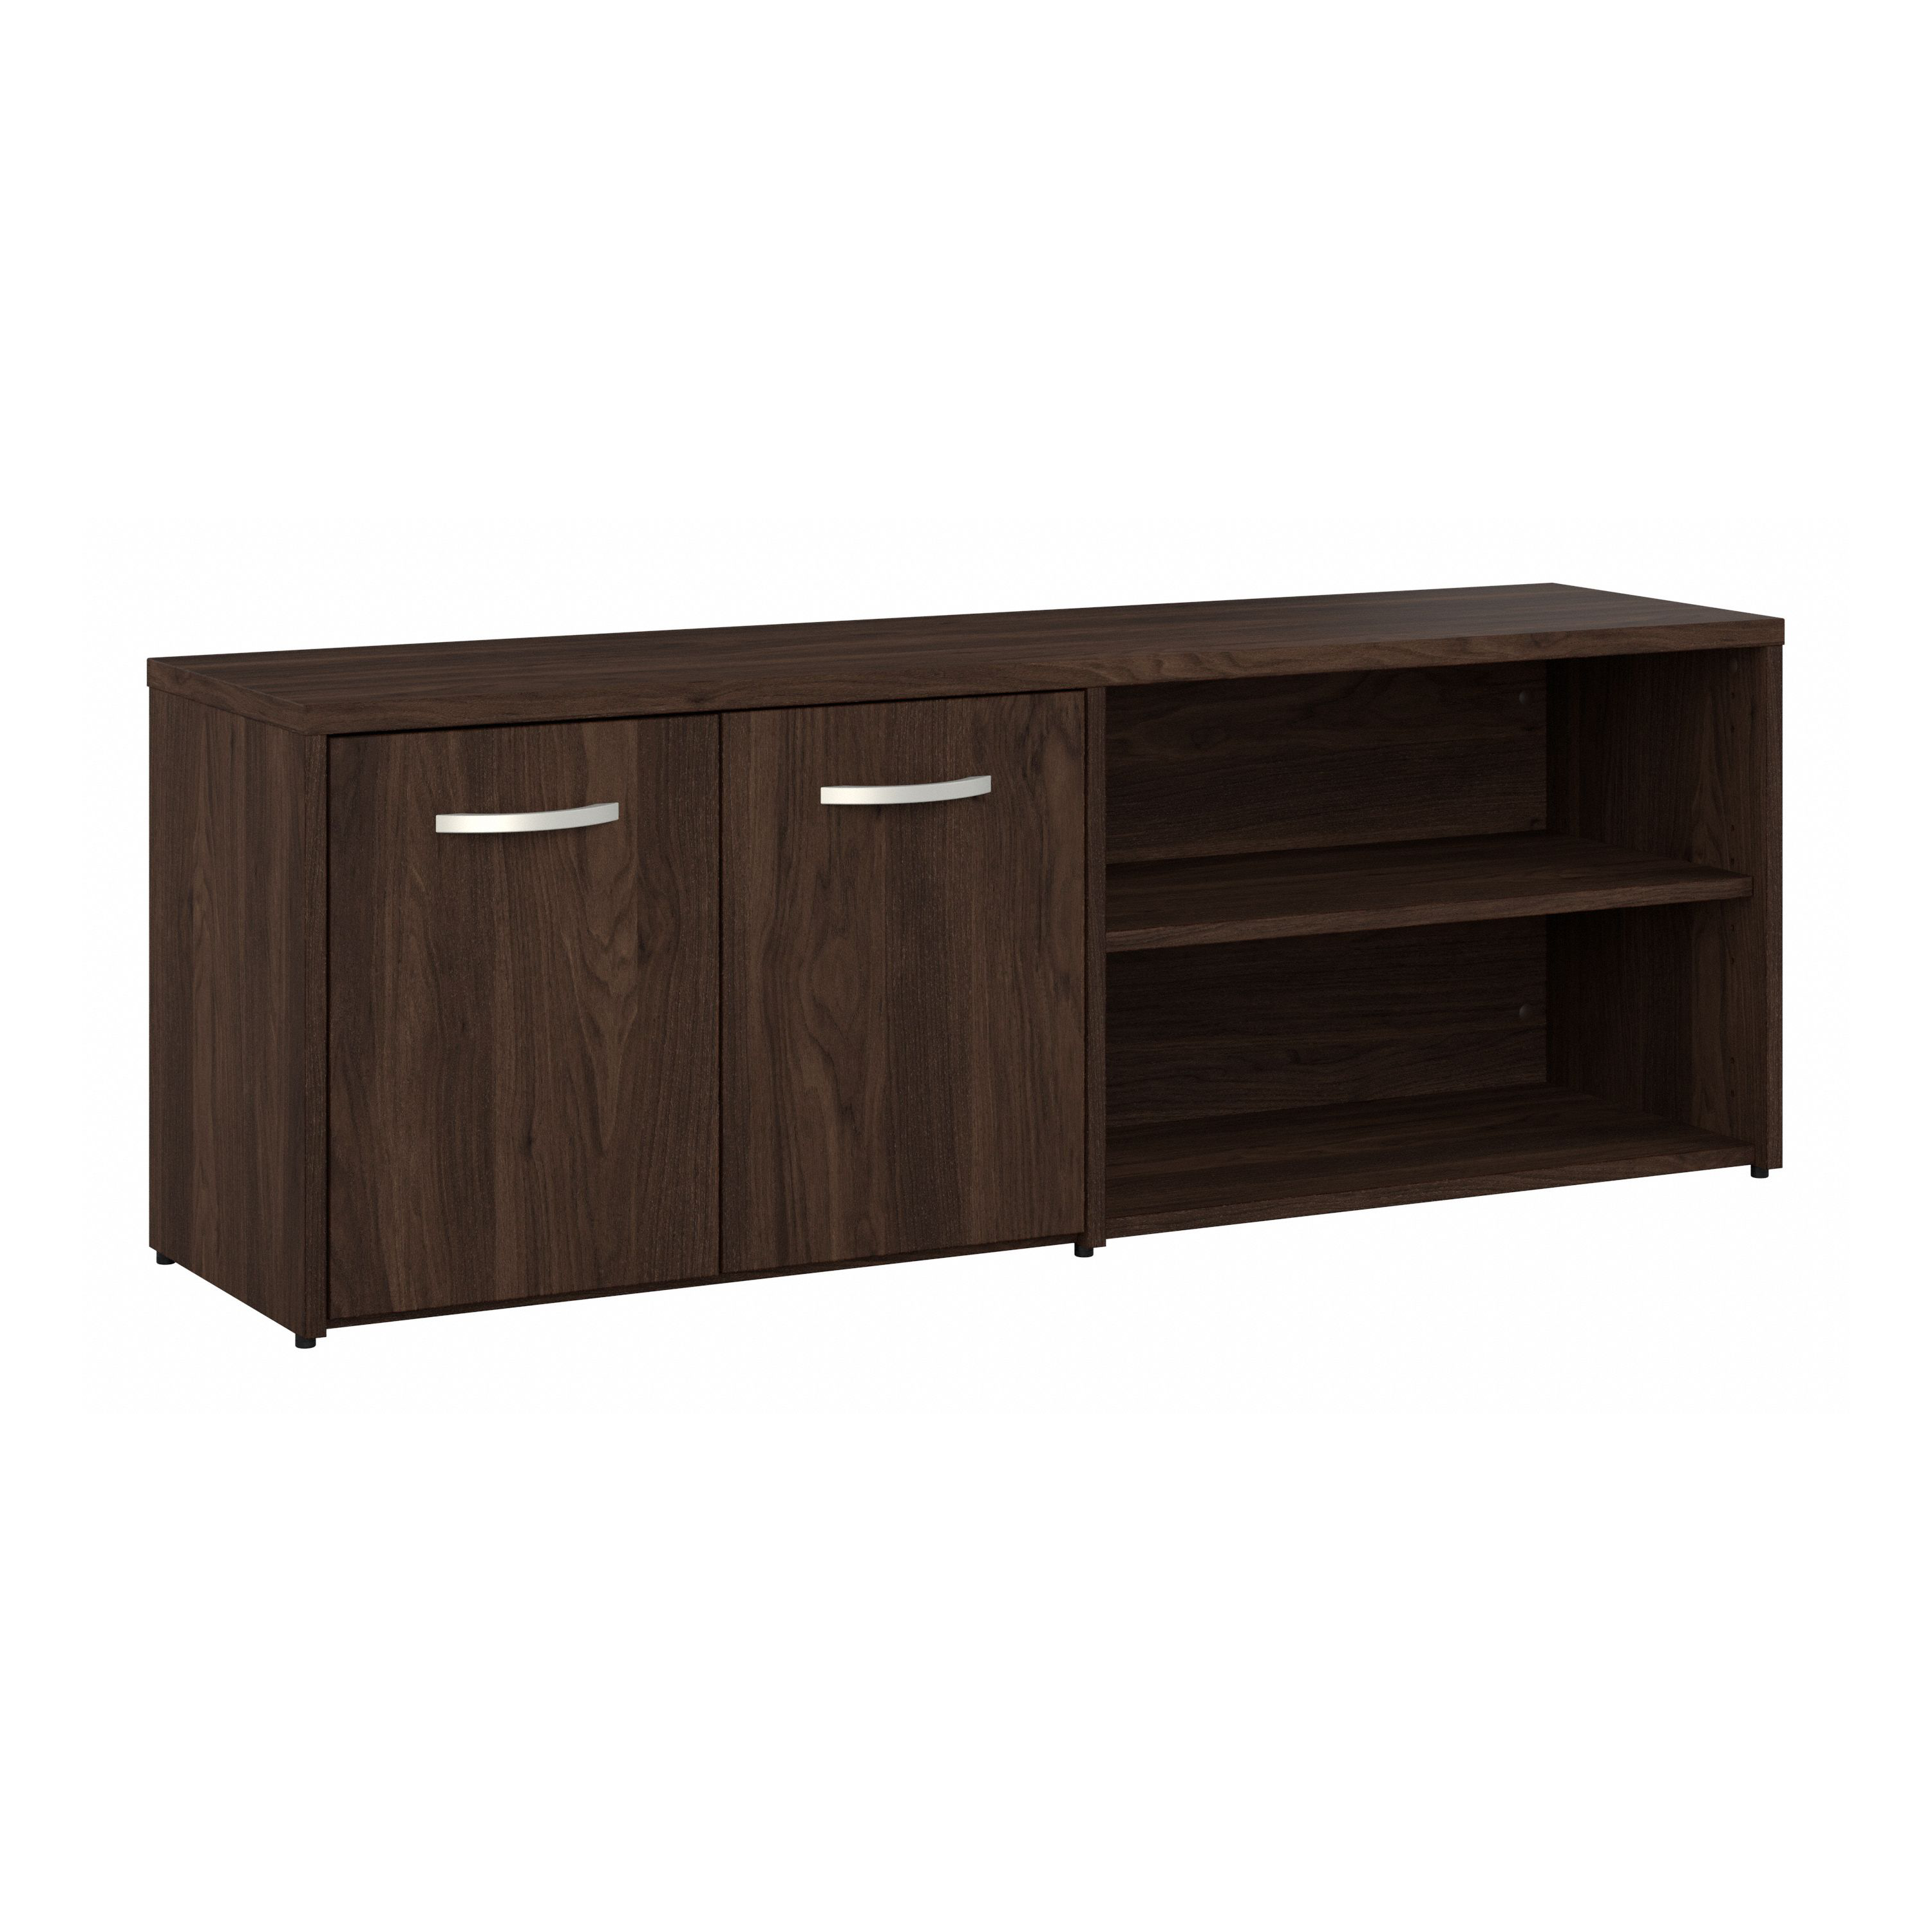 Shop Bush Business Furniture Hybrid Low Storage Cabinet with Doors and Shelves 02 HYS160BW-Z #color_black walnut